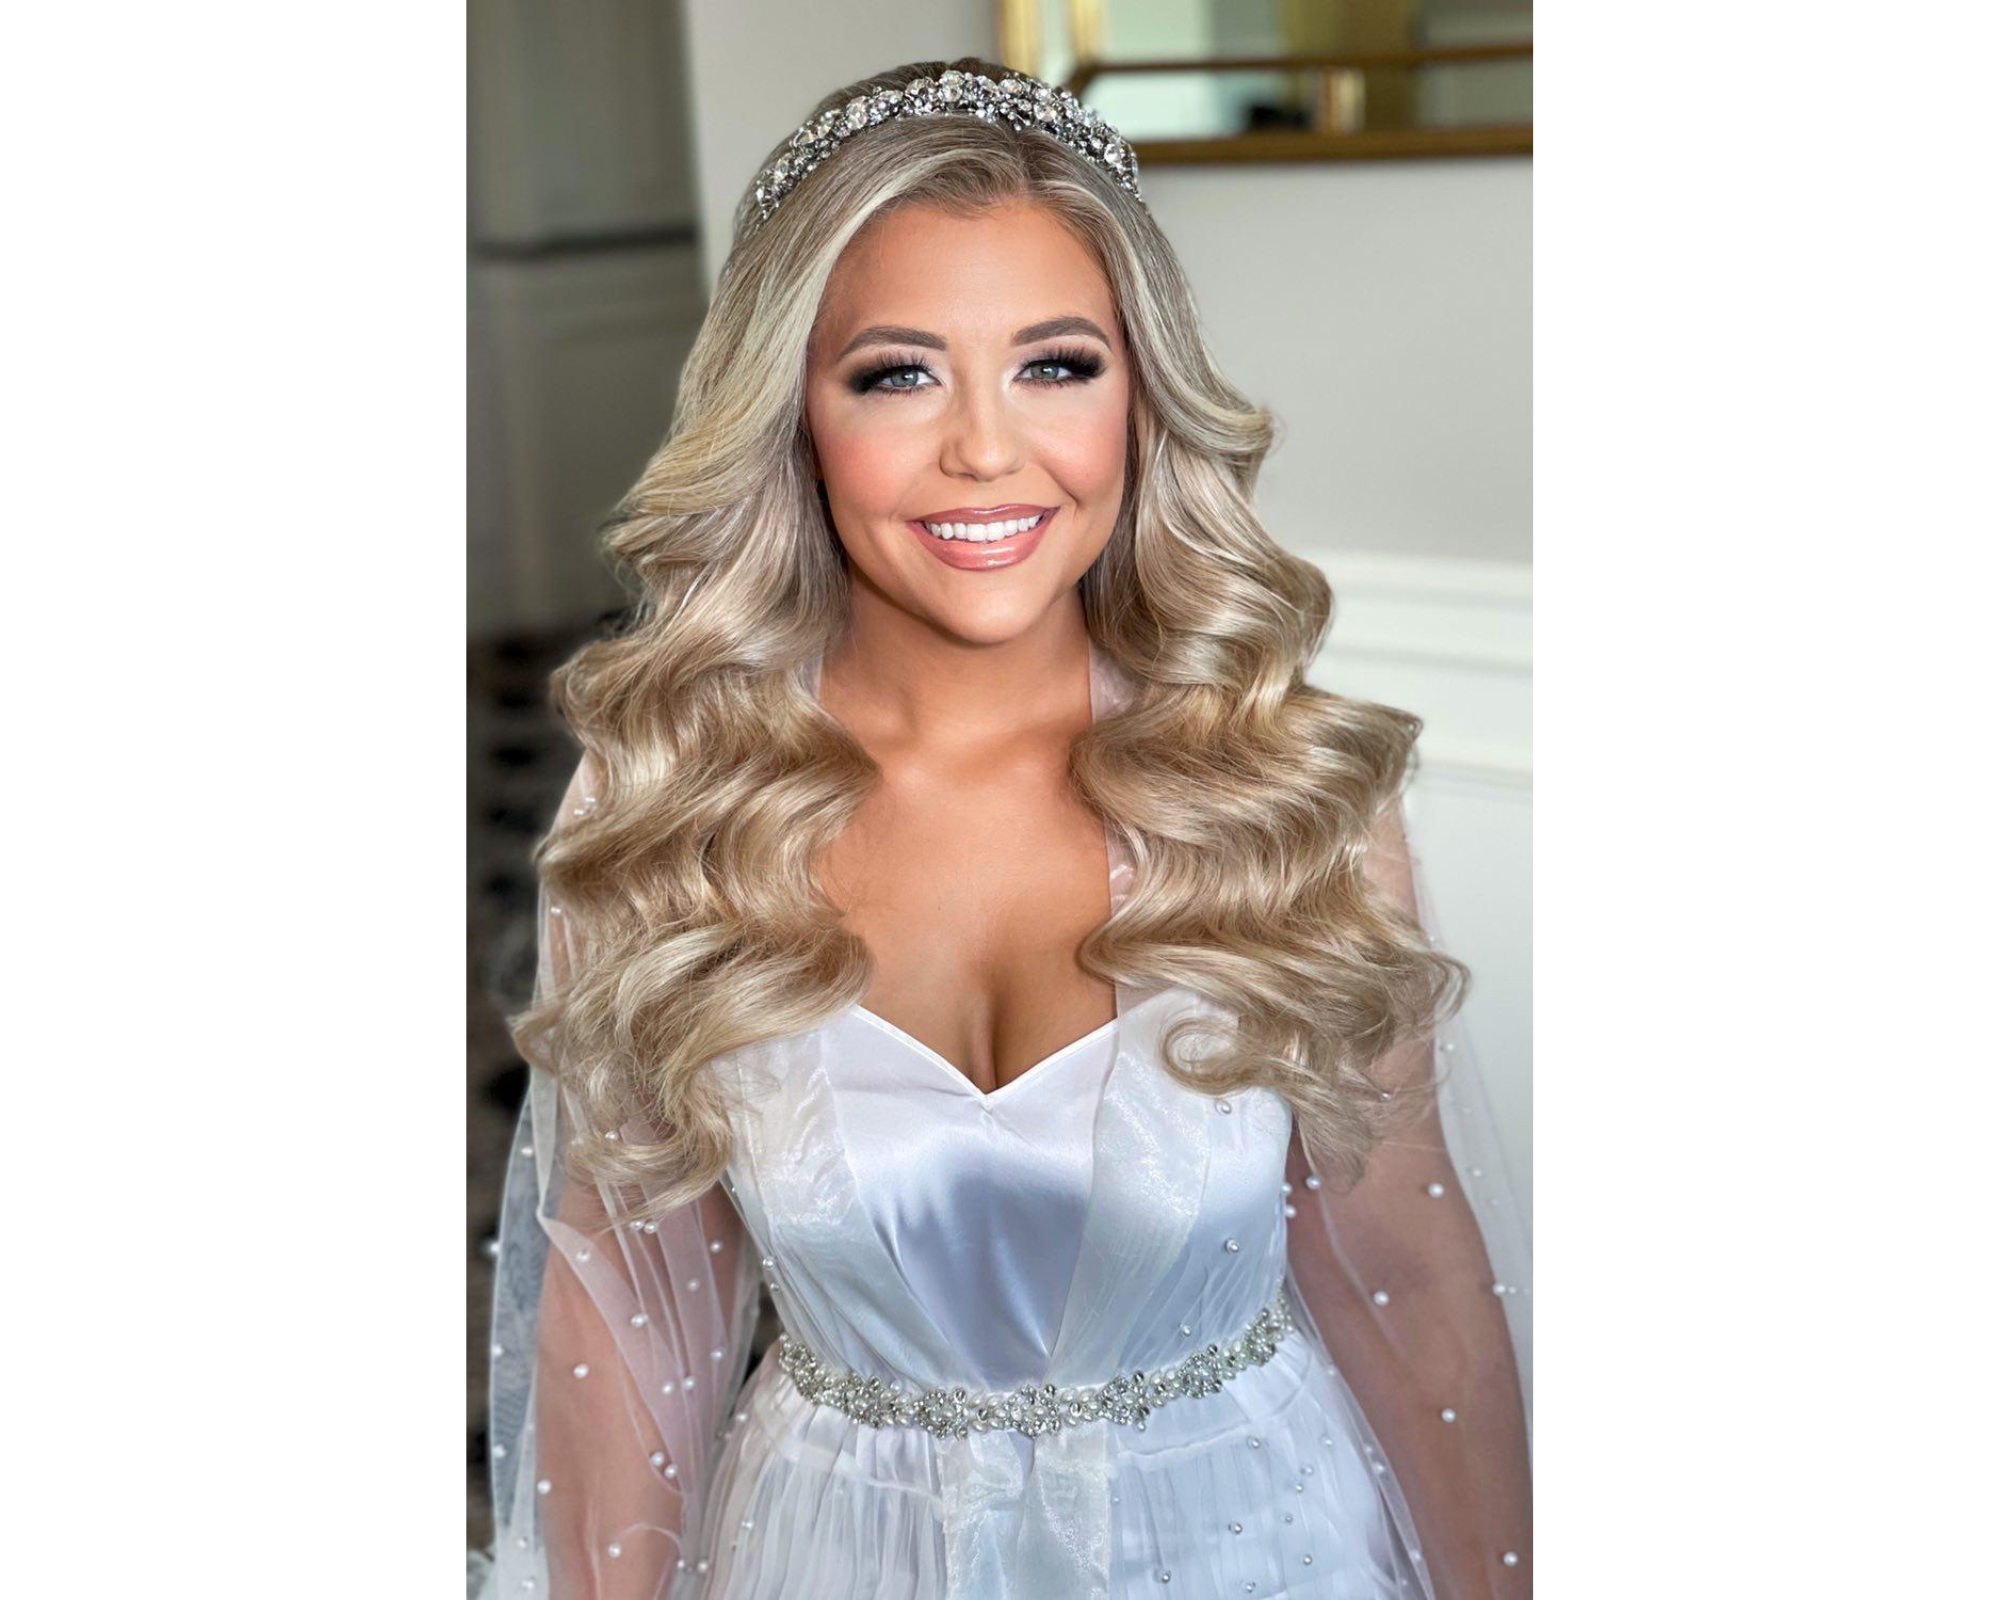 Beautiful bride Marissa on her wedding day! Her hair is in glam waves, and she’s wearing a Swarovski crystal headpiece.